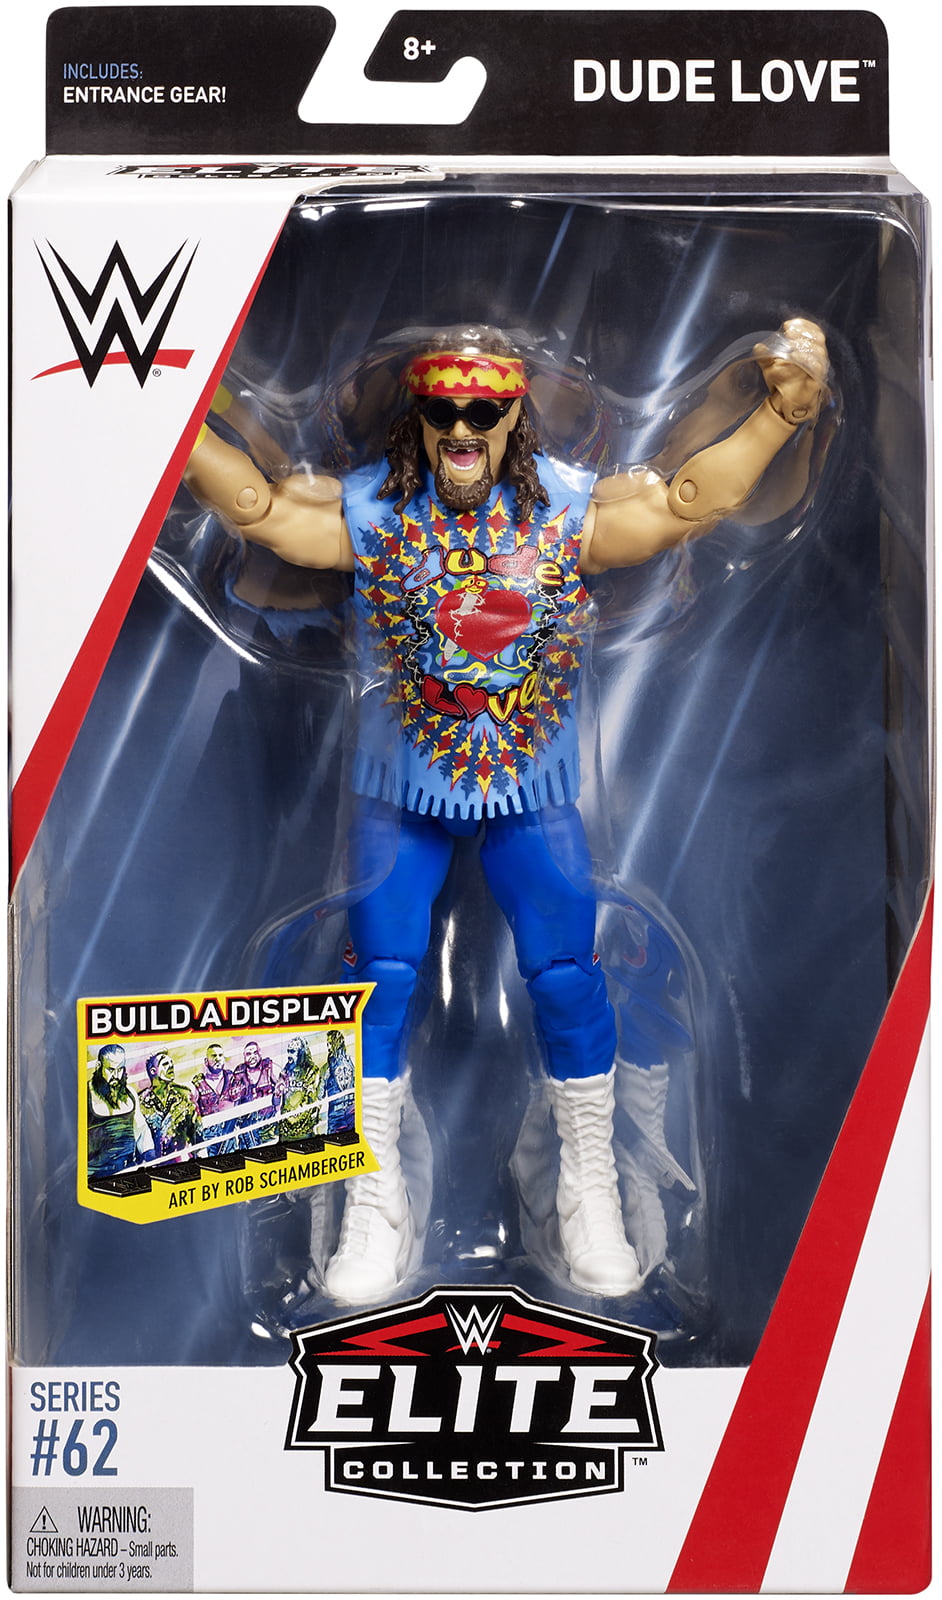 Current Series//Flashback Brand New WWE Elite Collection Wrestling Figure